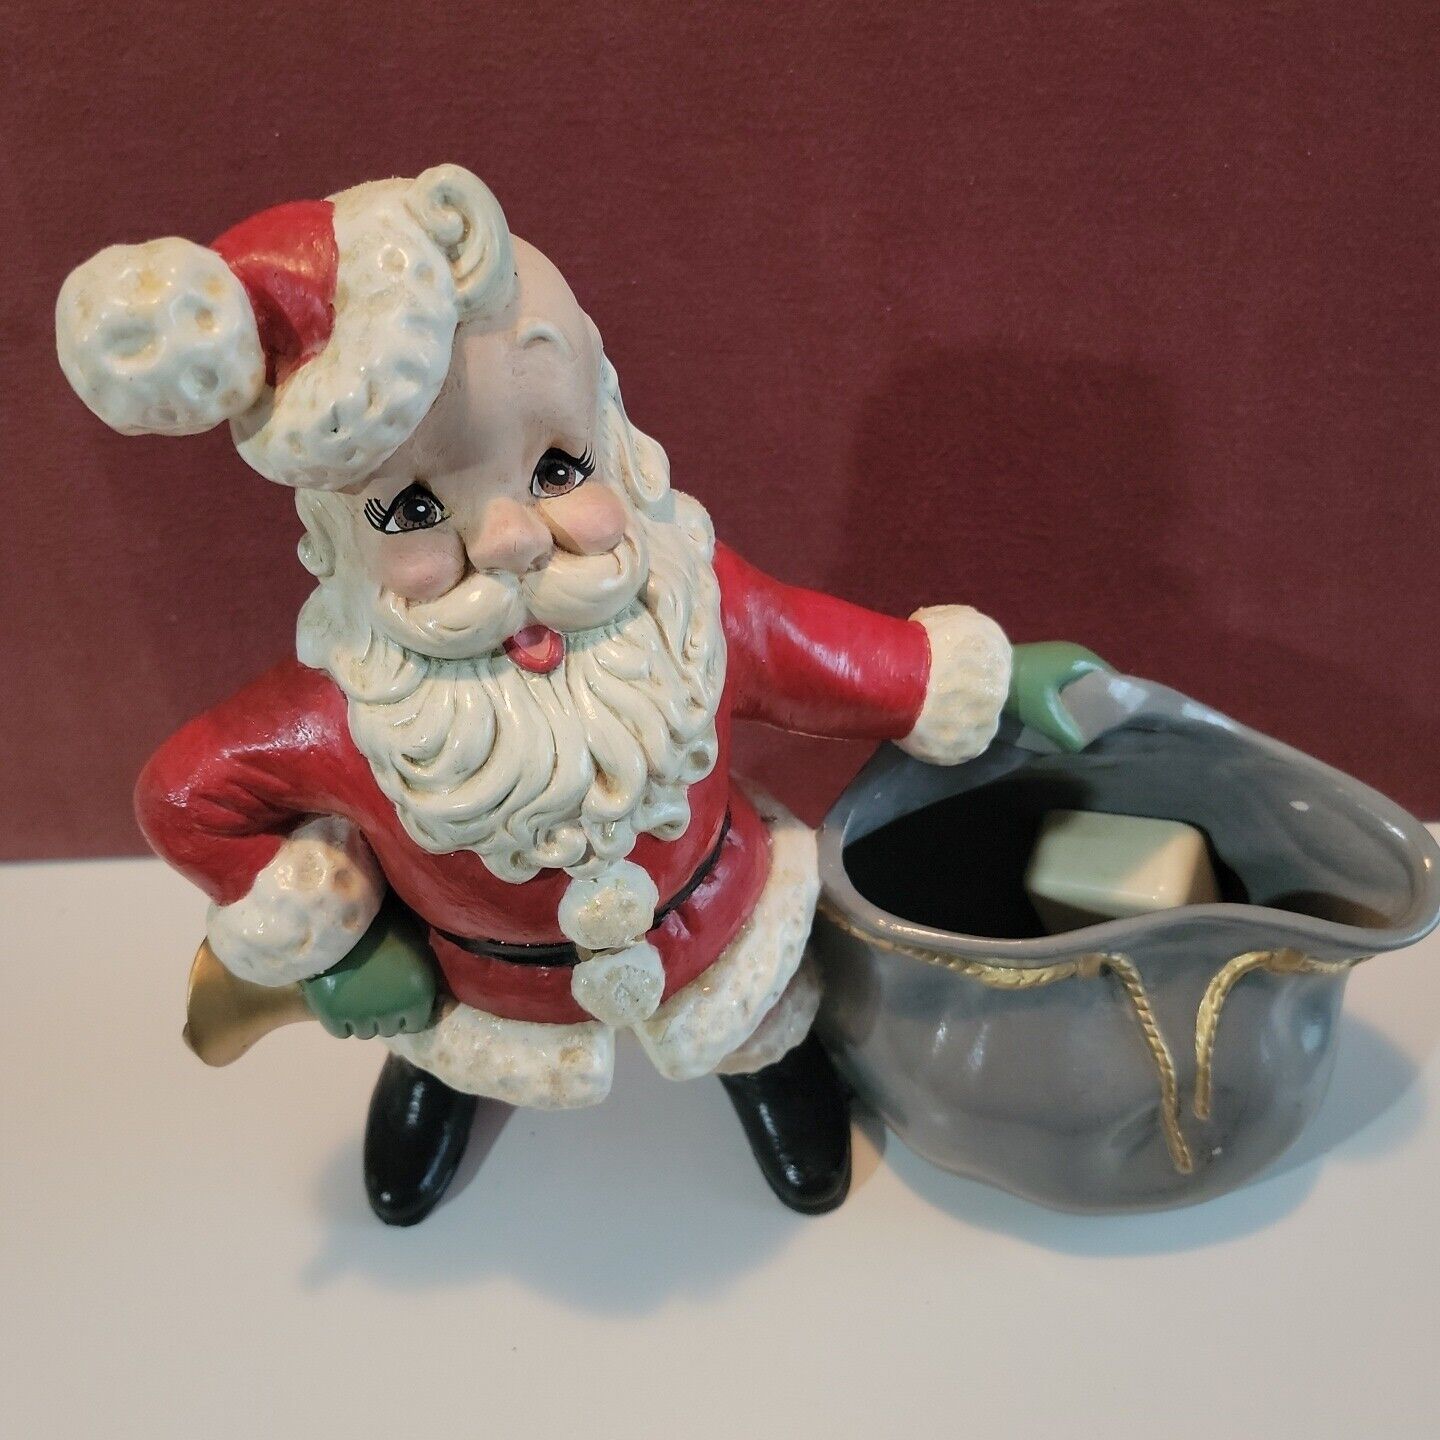 Vintage Hand Painted Ceramic Santa Claus With Bell And Toy Bag Music Box